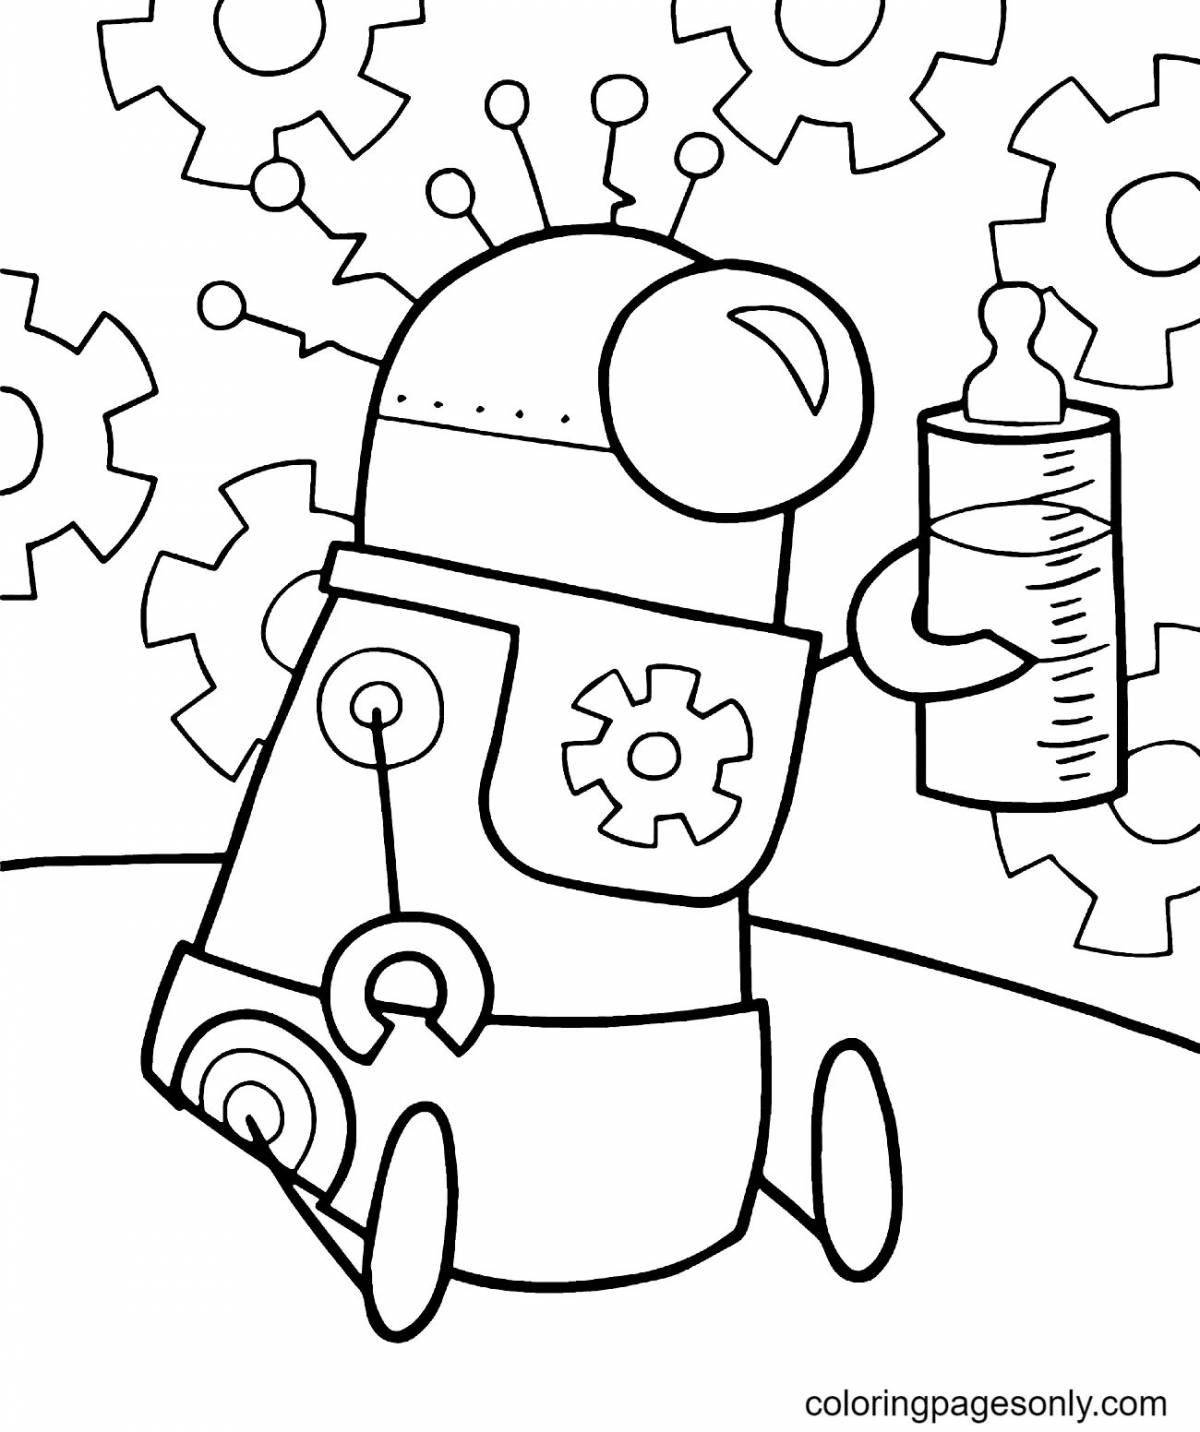 Amazing robot coloring page for kids